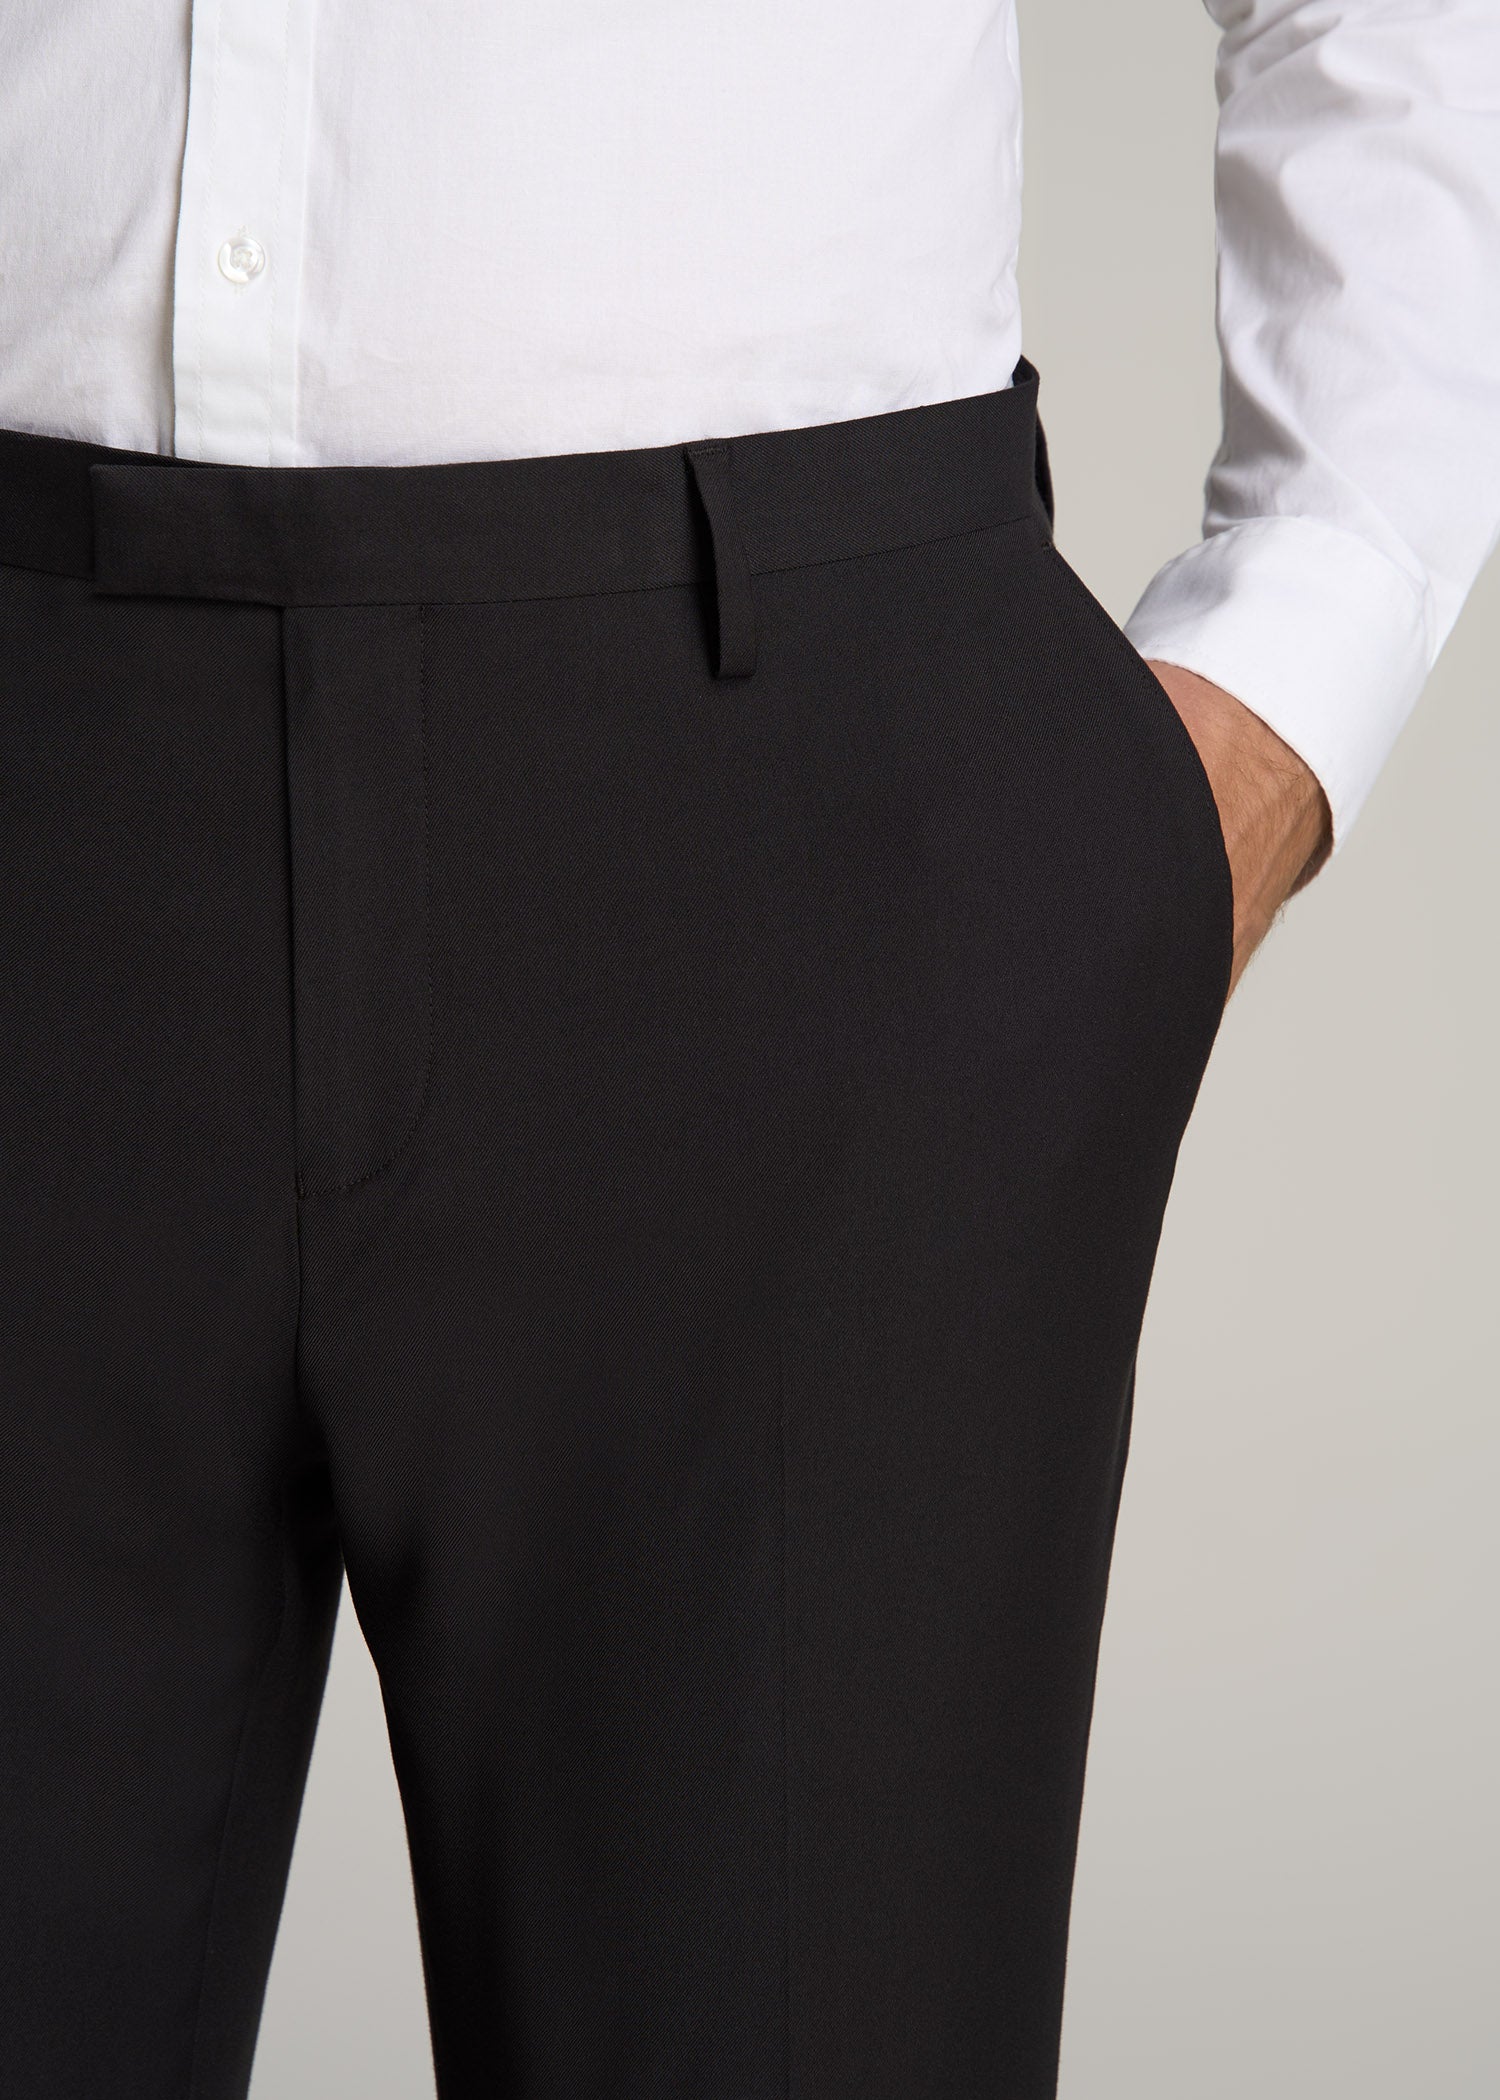 Narrow Fashion Regular Fit Men Grey Trousers - Buy Narrow Fashion Regular  Fit Men Grey Trousers Online at Best Prices in India | Flipkart.com